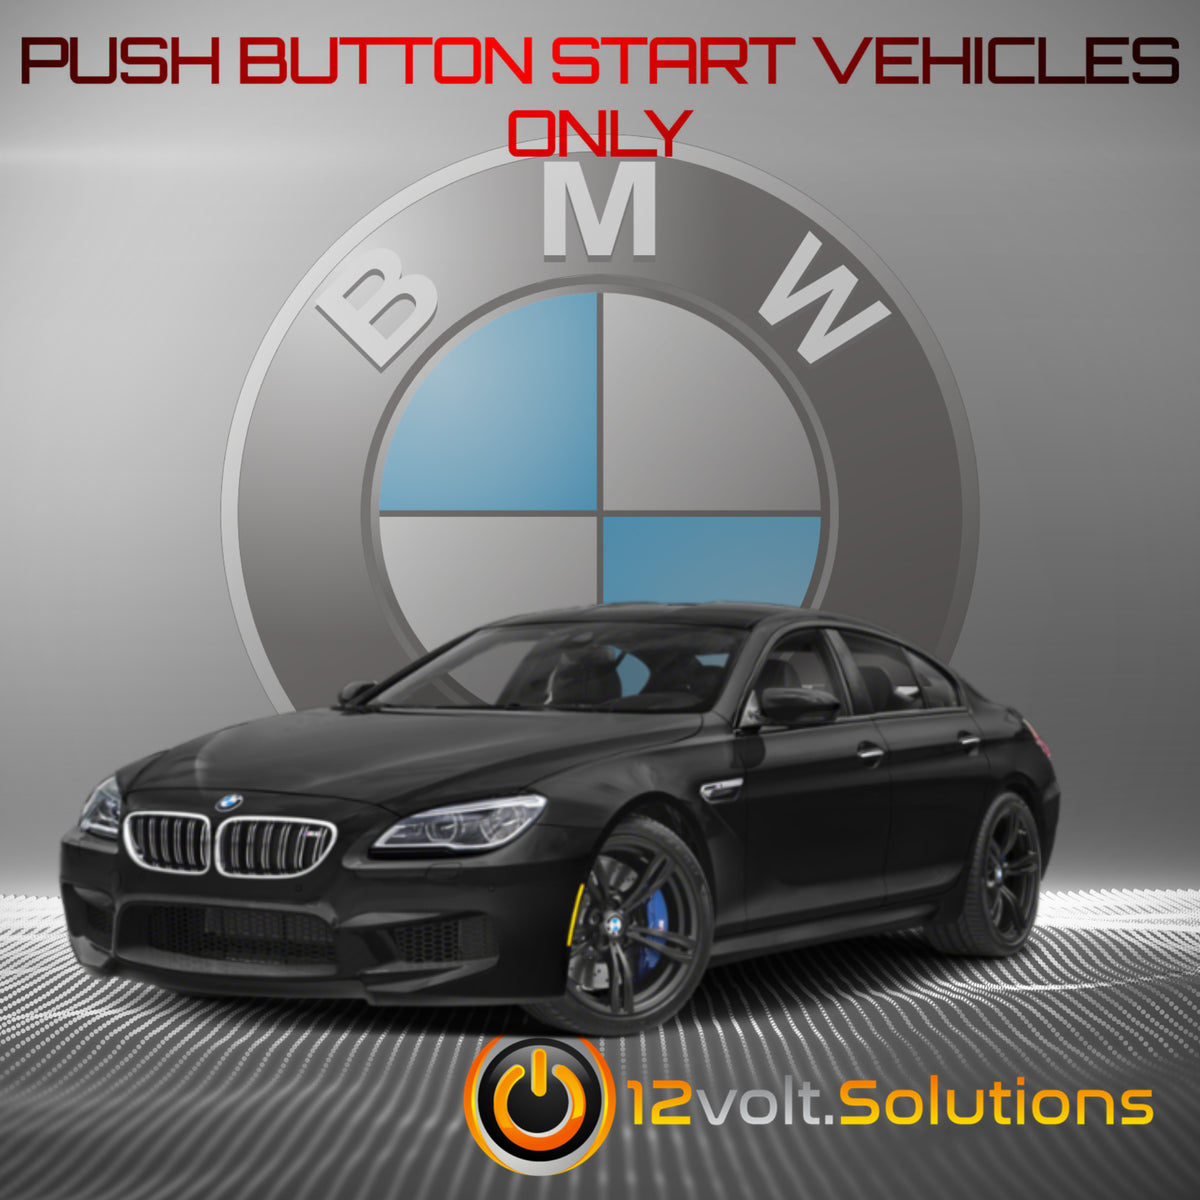 2006-2010 BMW M6 Plug and Play Remote Start Kit (Push Button Start)-12Volt.Solutions